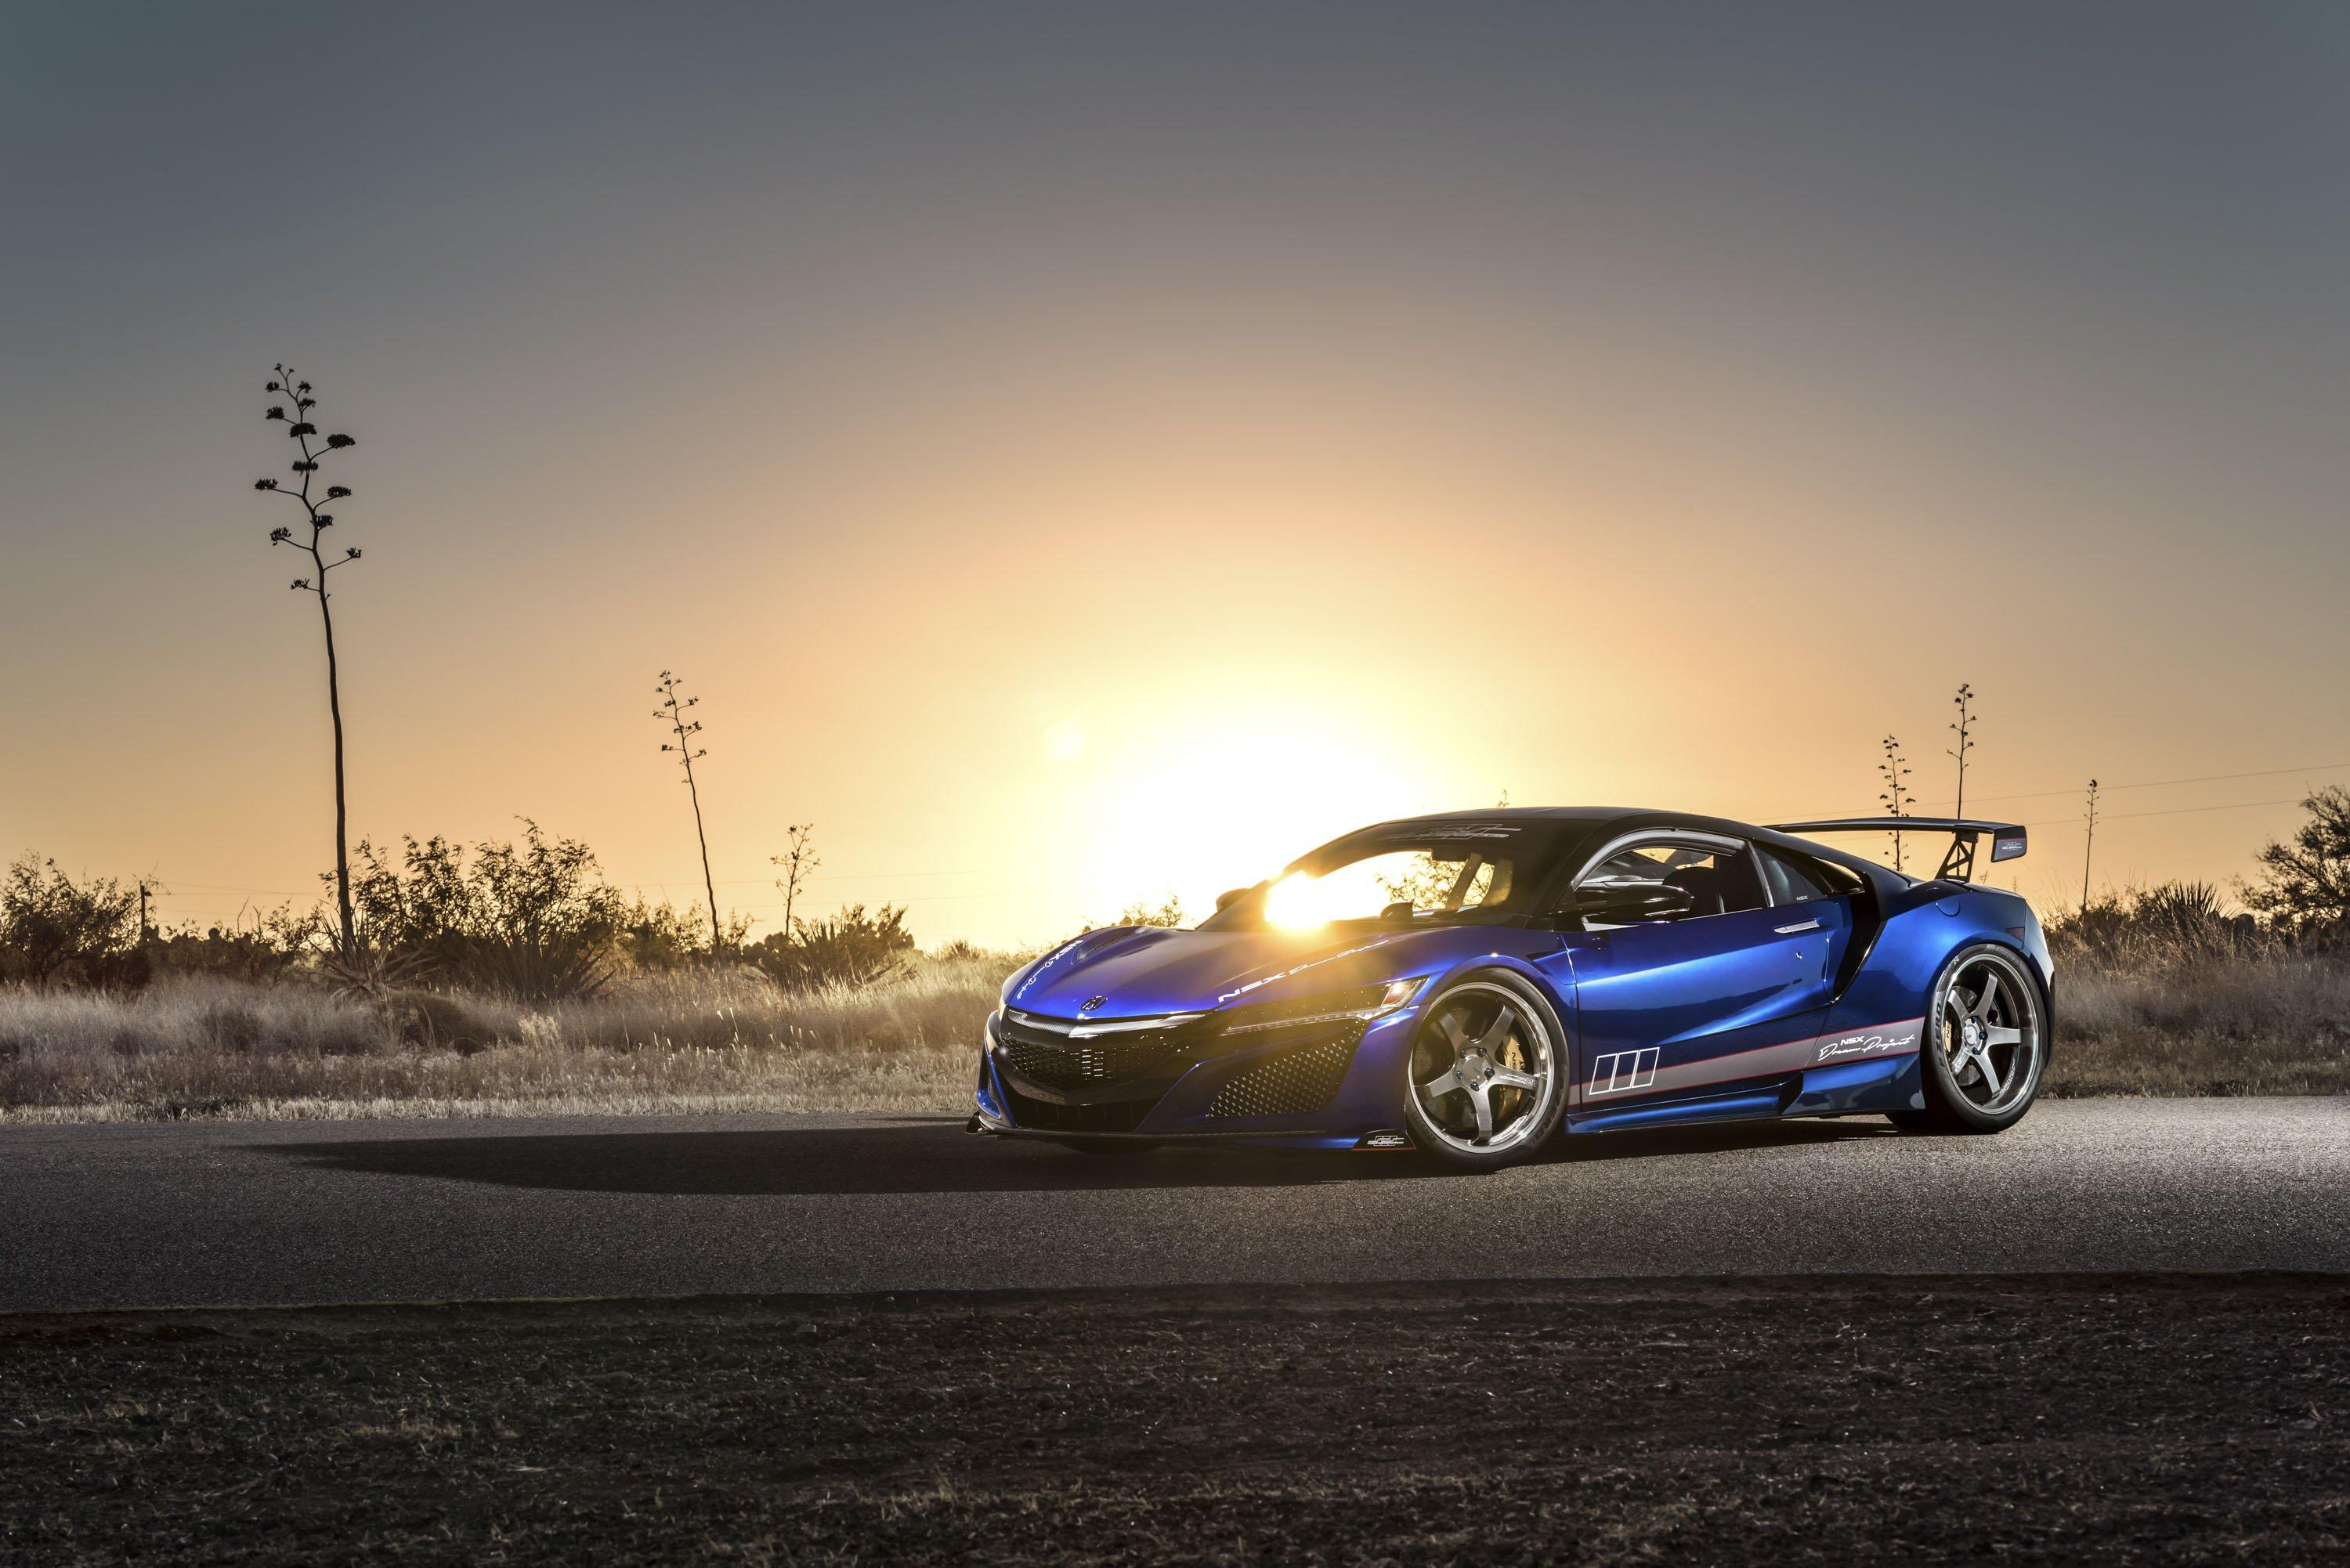 Wallpaper Of The Day: 2017 Acura NSX Dream Picture, Photo